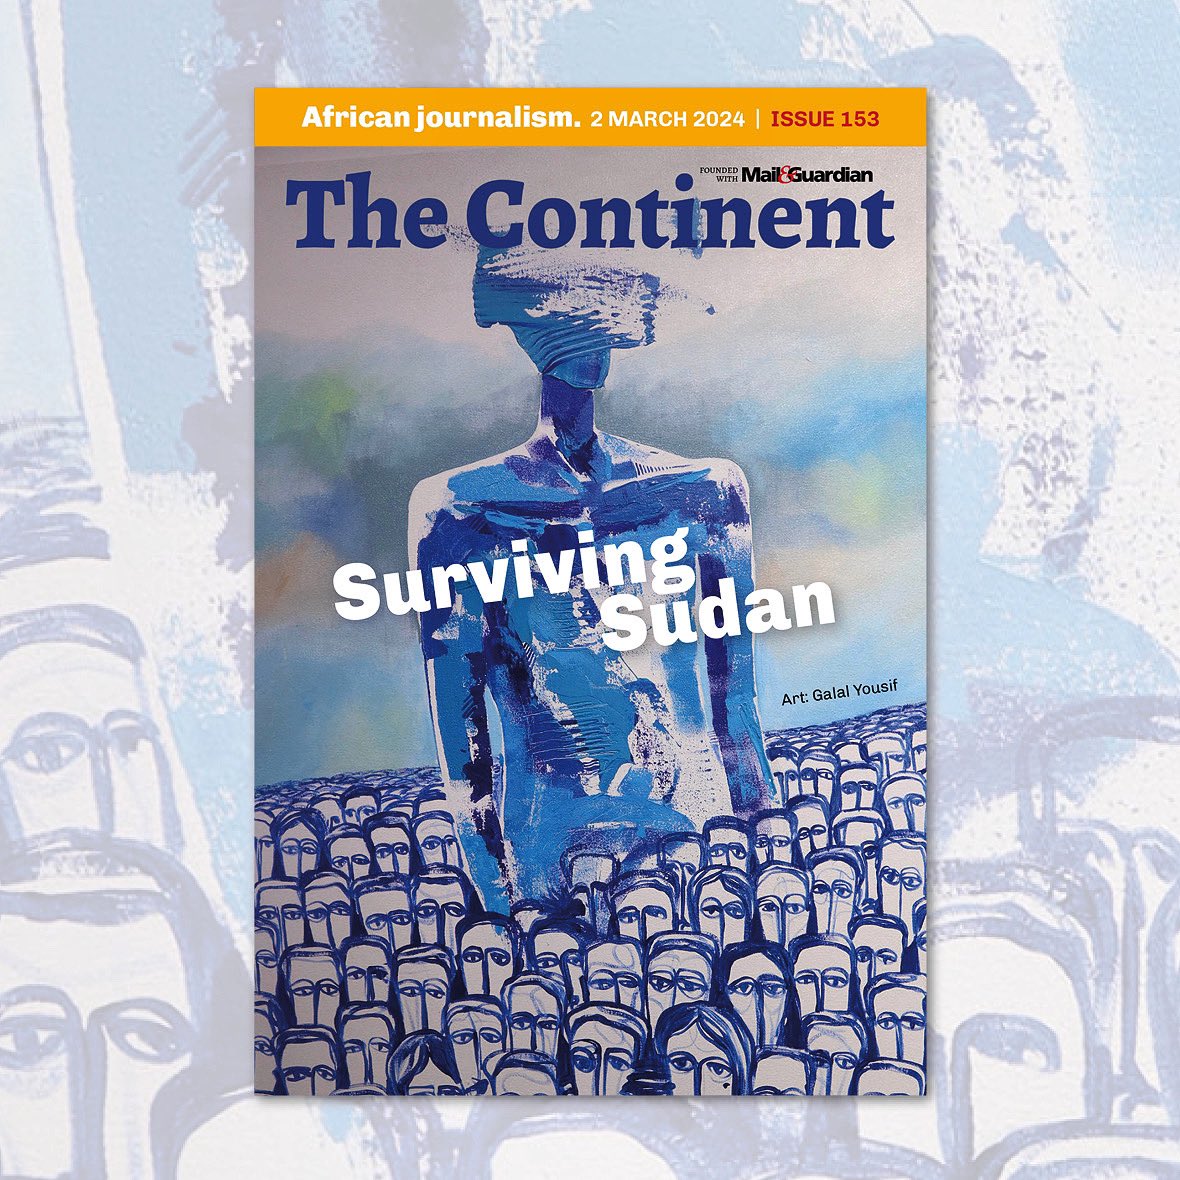 All Protocol Observed Welcome to Issue 153 of The Continent. The civil war in Sudan has brought untold death and destruction. And yet, somehow, life goes on.